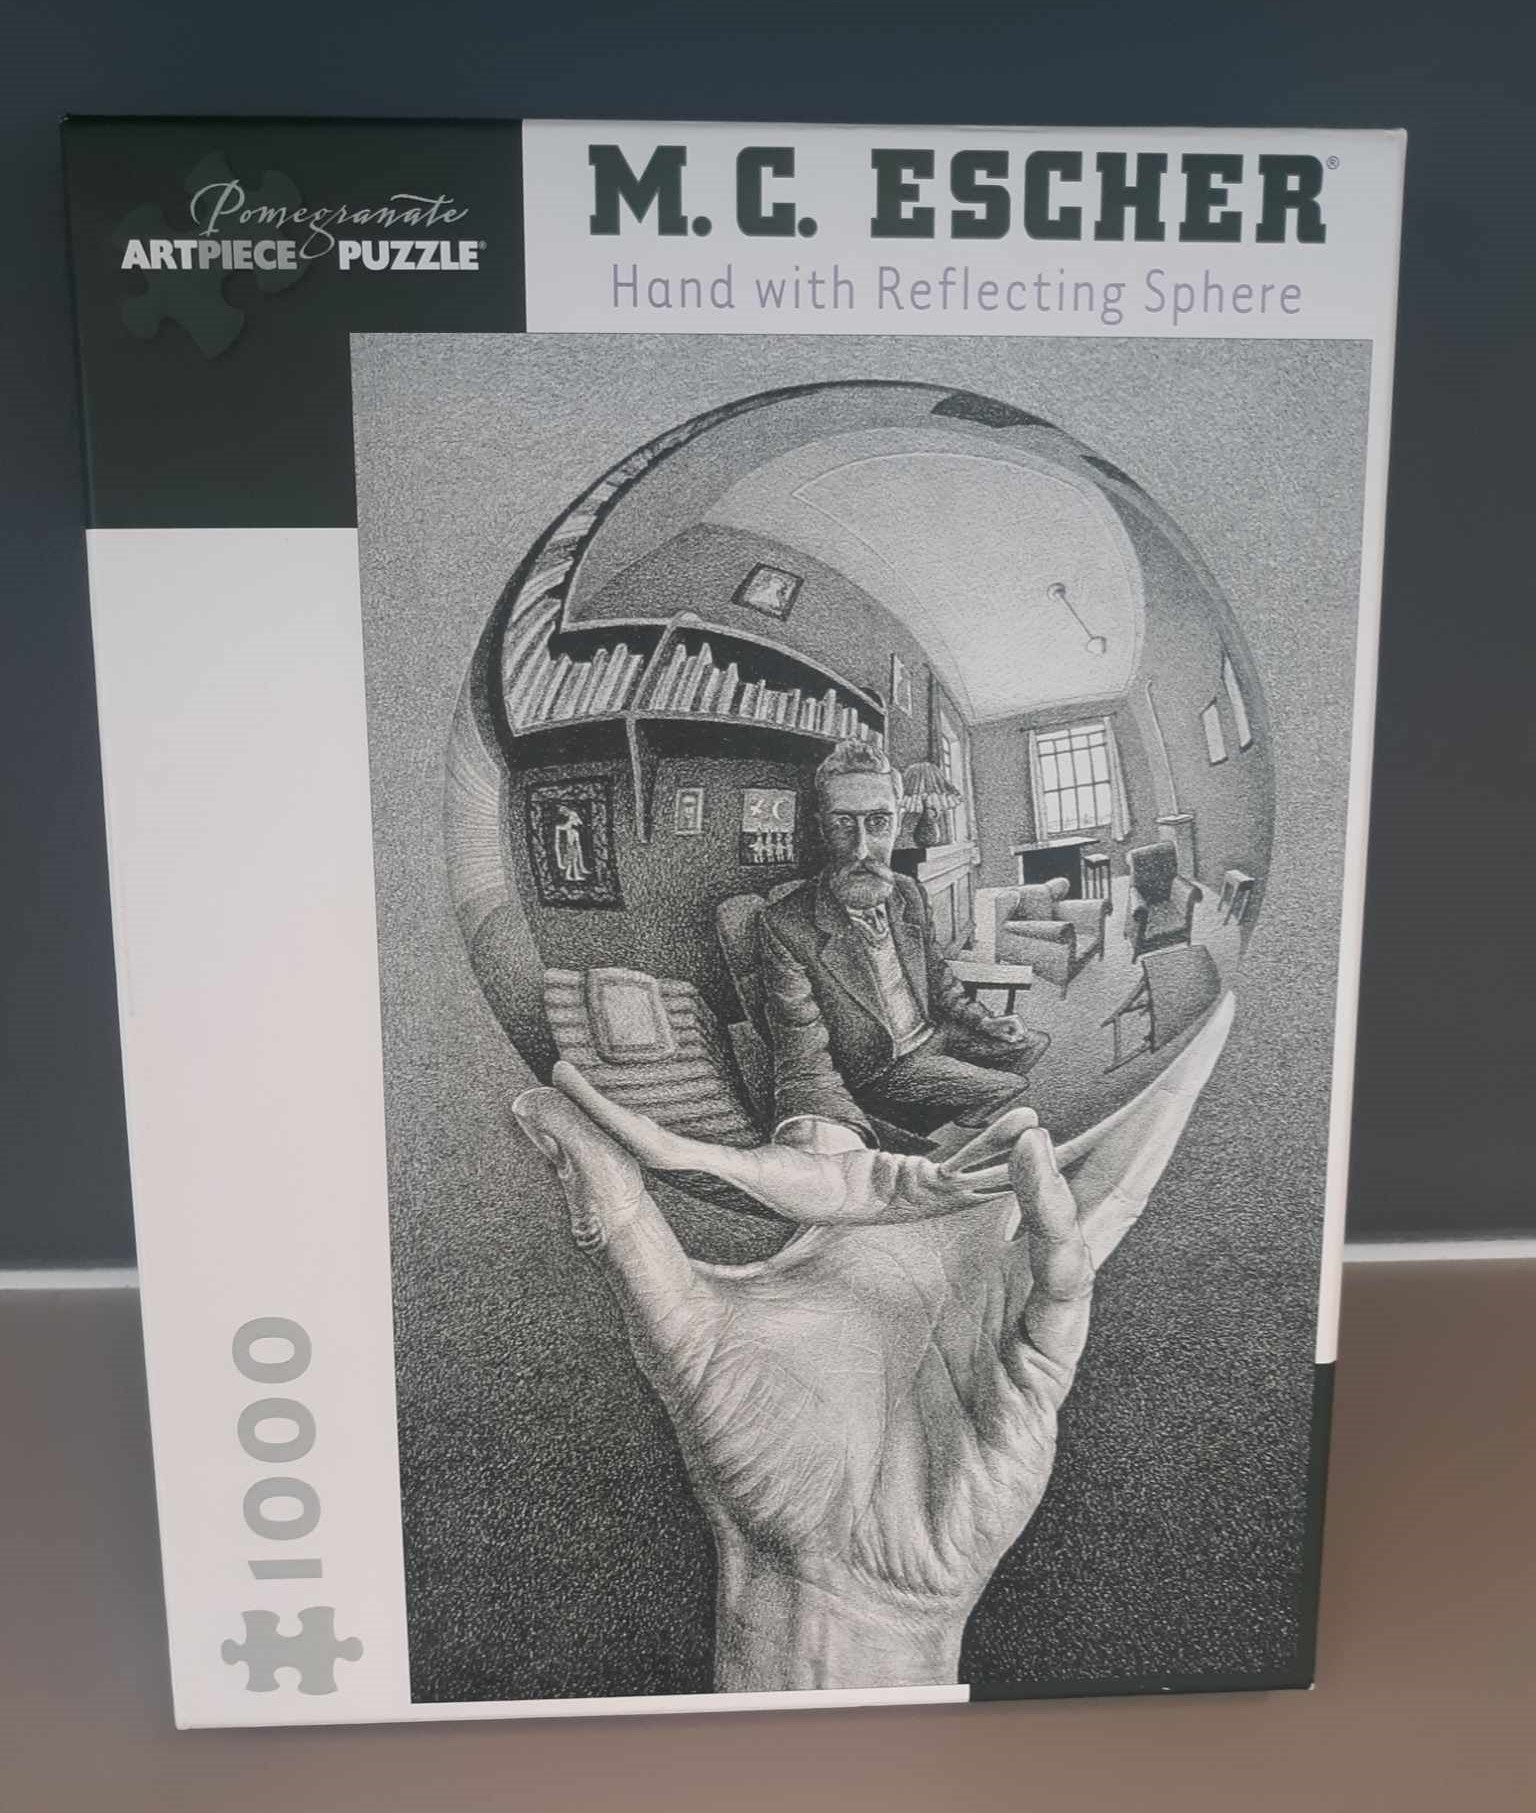 Cover image of puzzle, hand with reflecting sphere